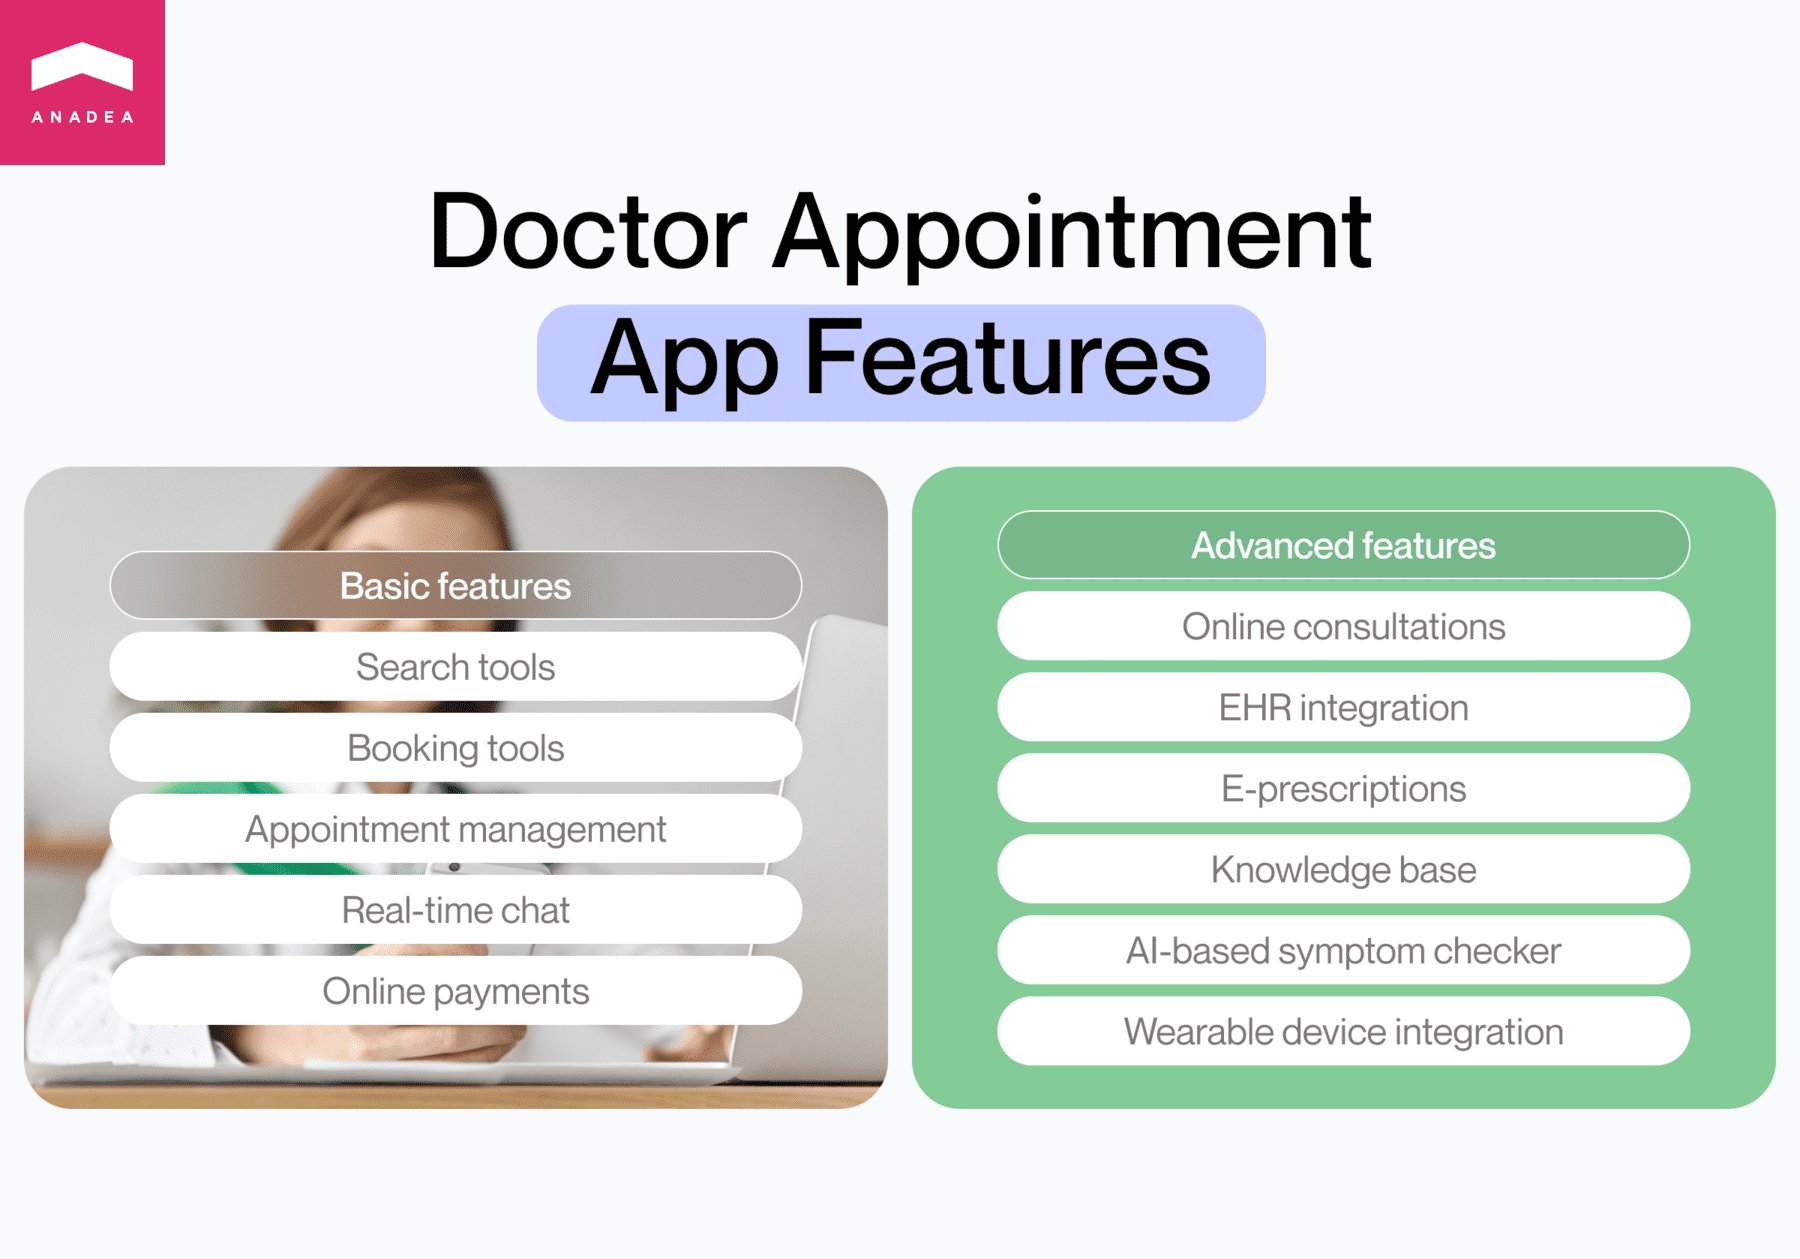 Doctor appointment app features